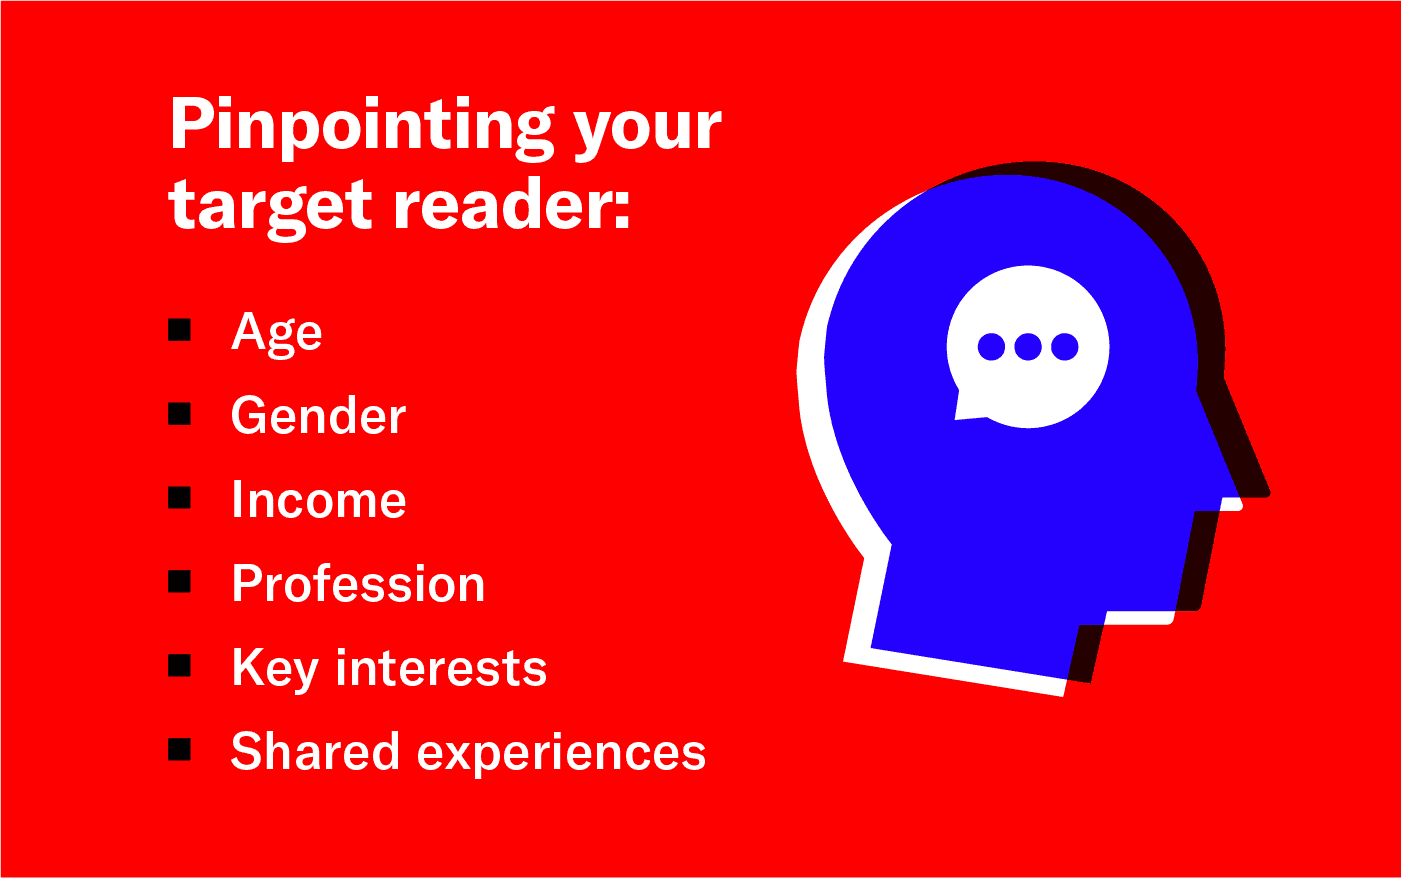 Target reader characteristics include age, gender, income, profession, key interests, and shared experiences